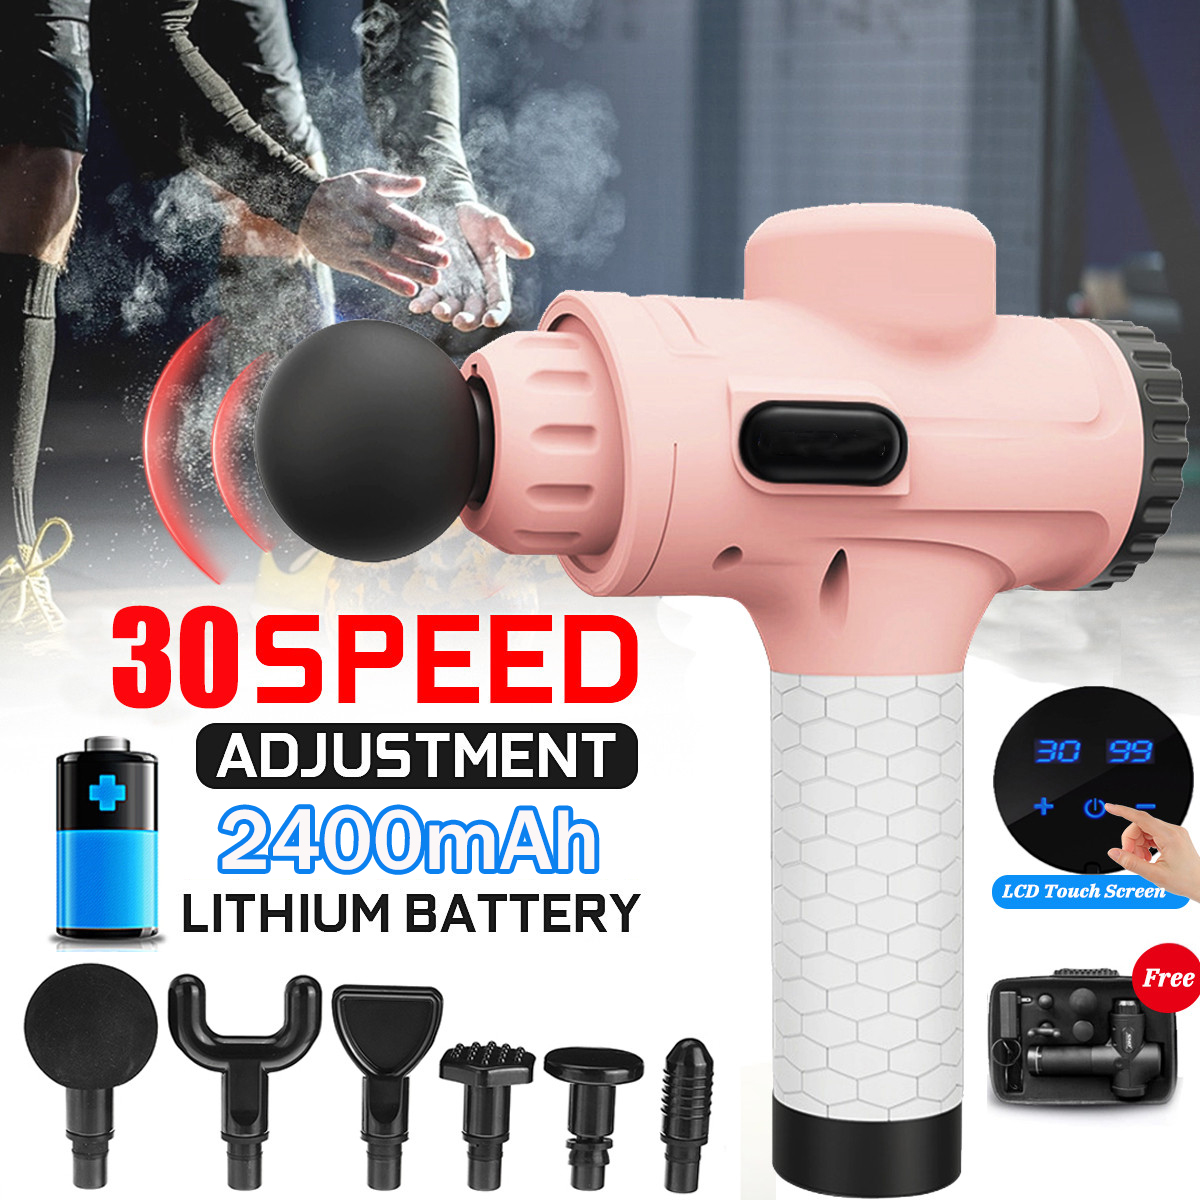 [Deluxe Edition] LCD 30 Speed Deep Percussion Massager Muscle Relief 2400mAh Electric Massager High Frequency Vibration w/ 6 Heads